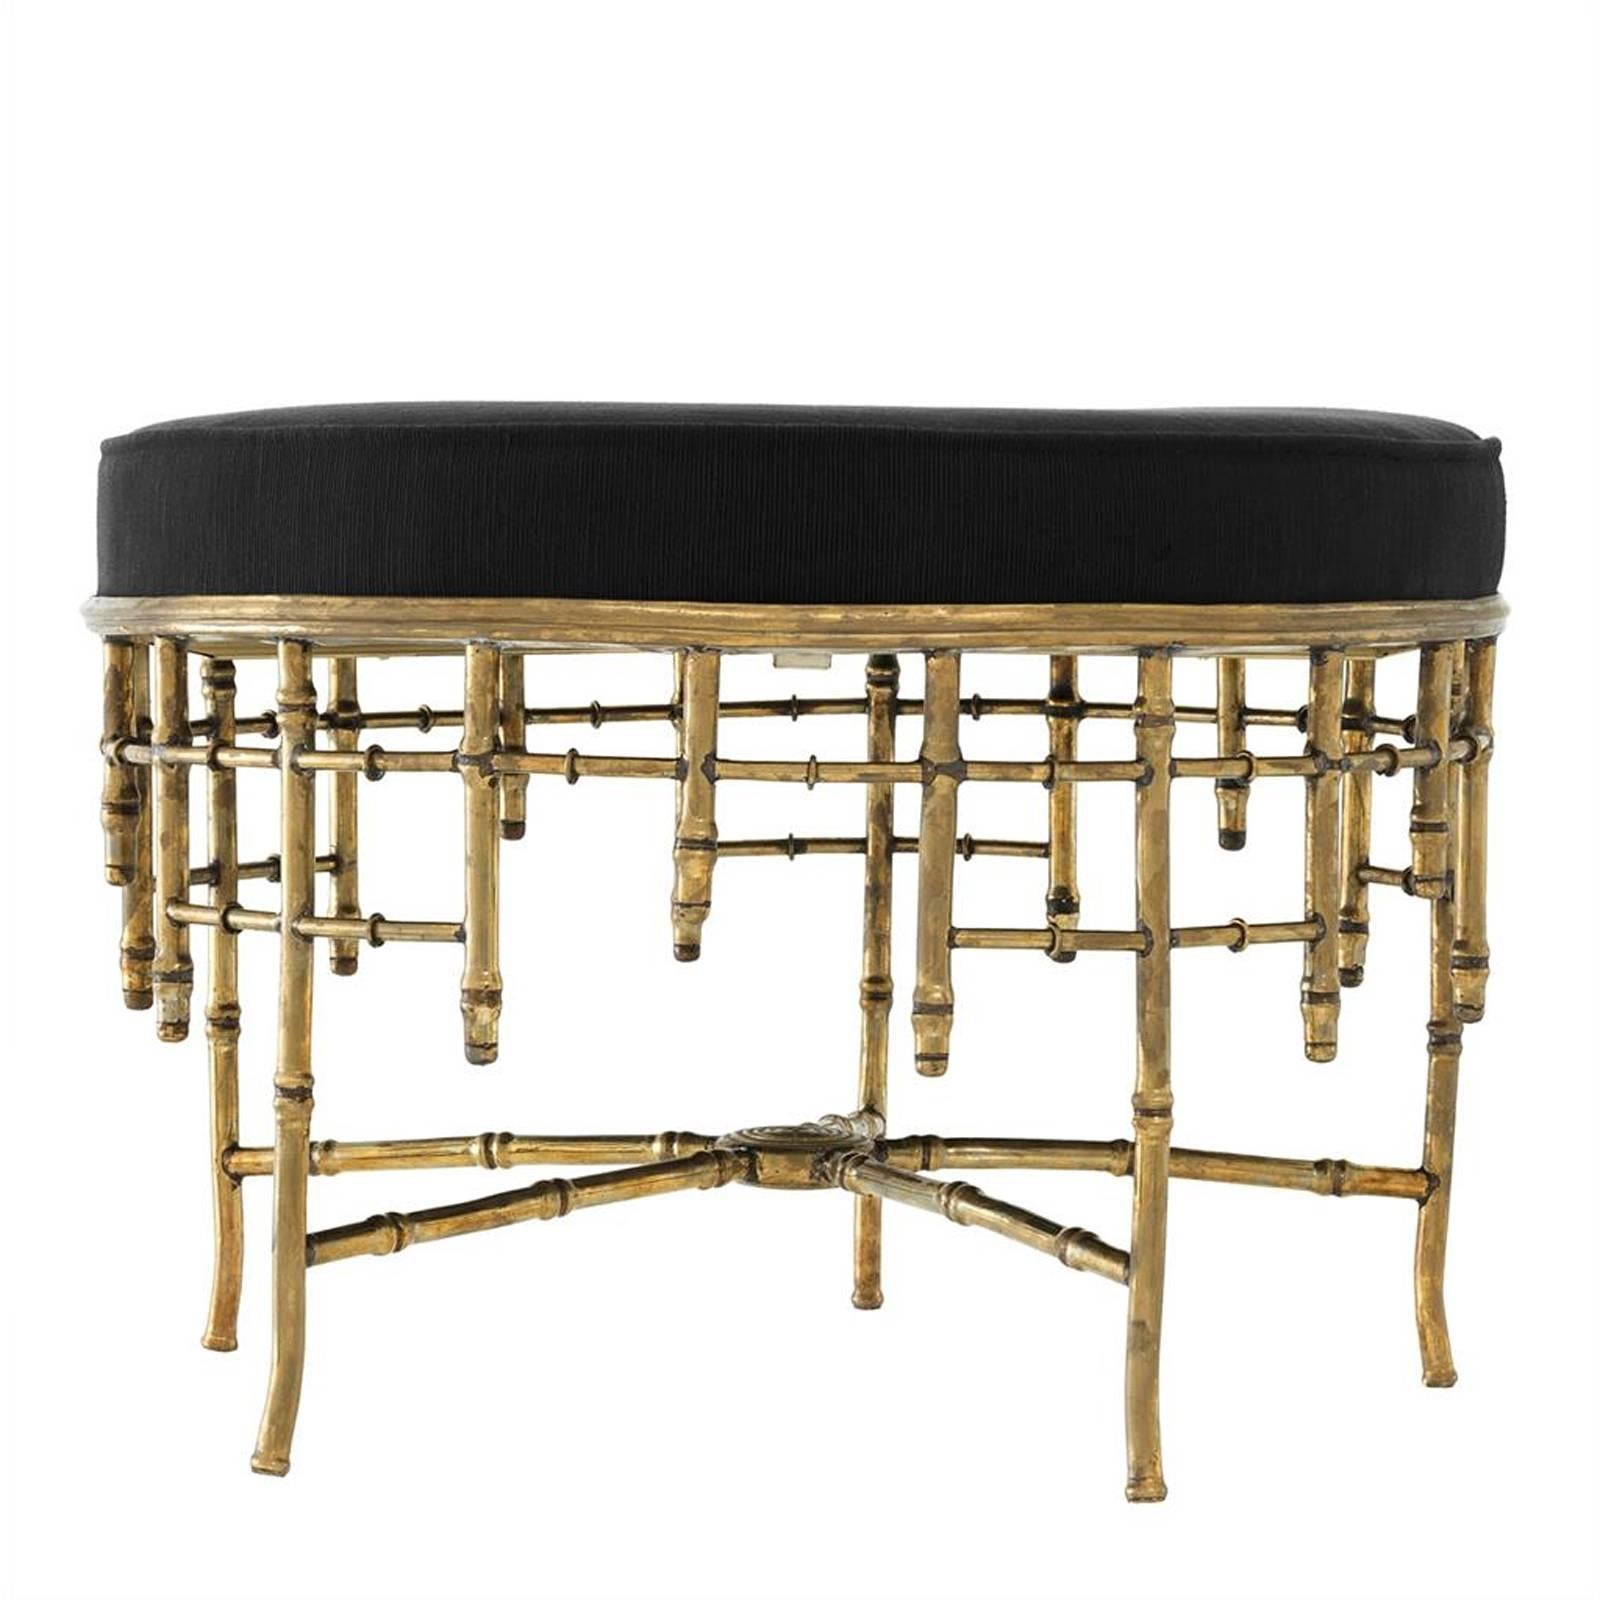 Indian Reed Large Stool in Vintage Brass Finish and Black Velvet Seat